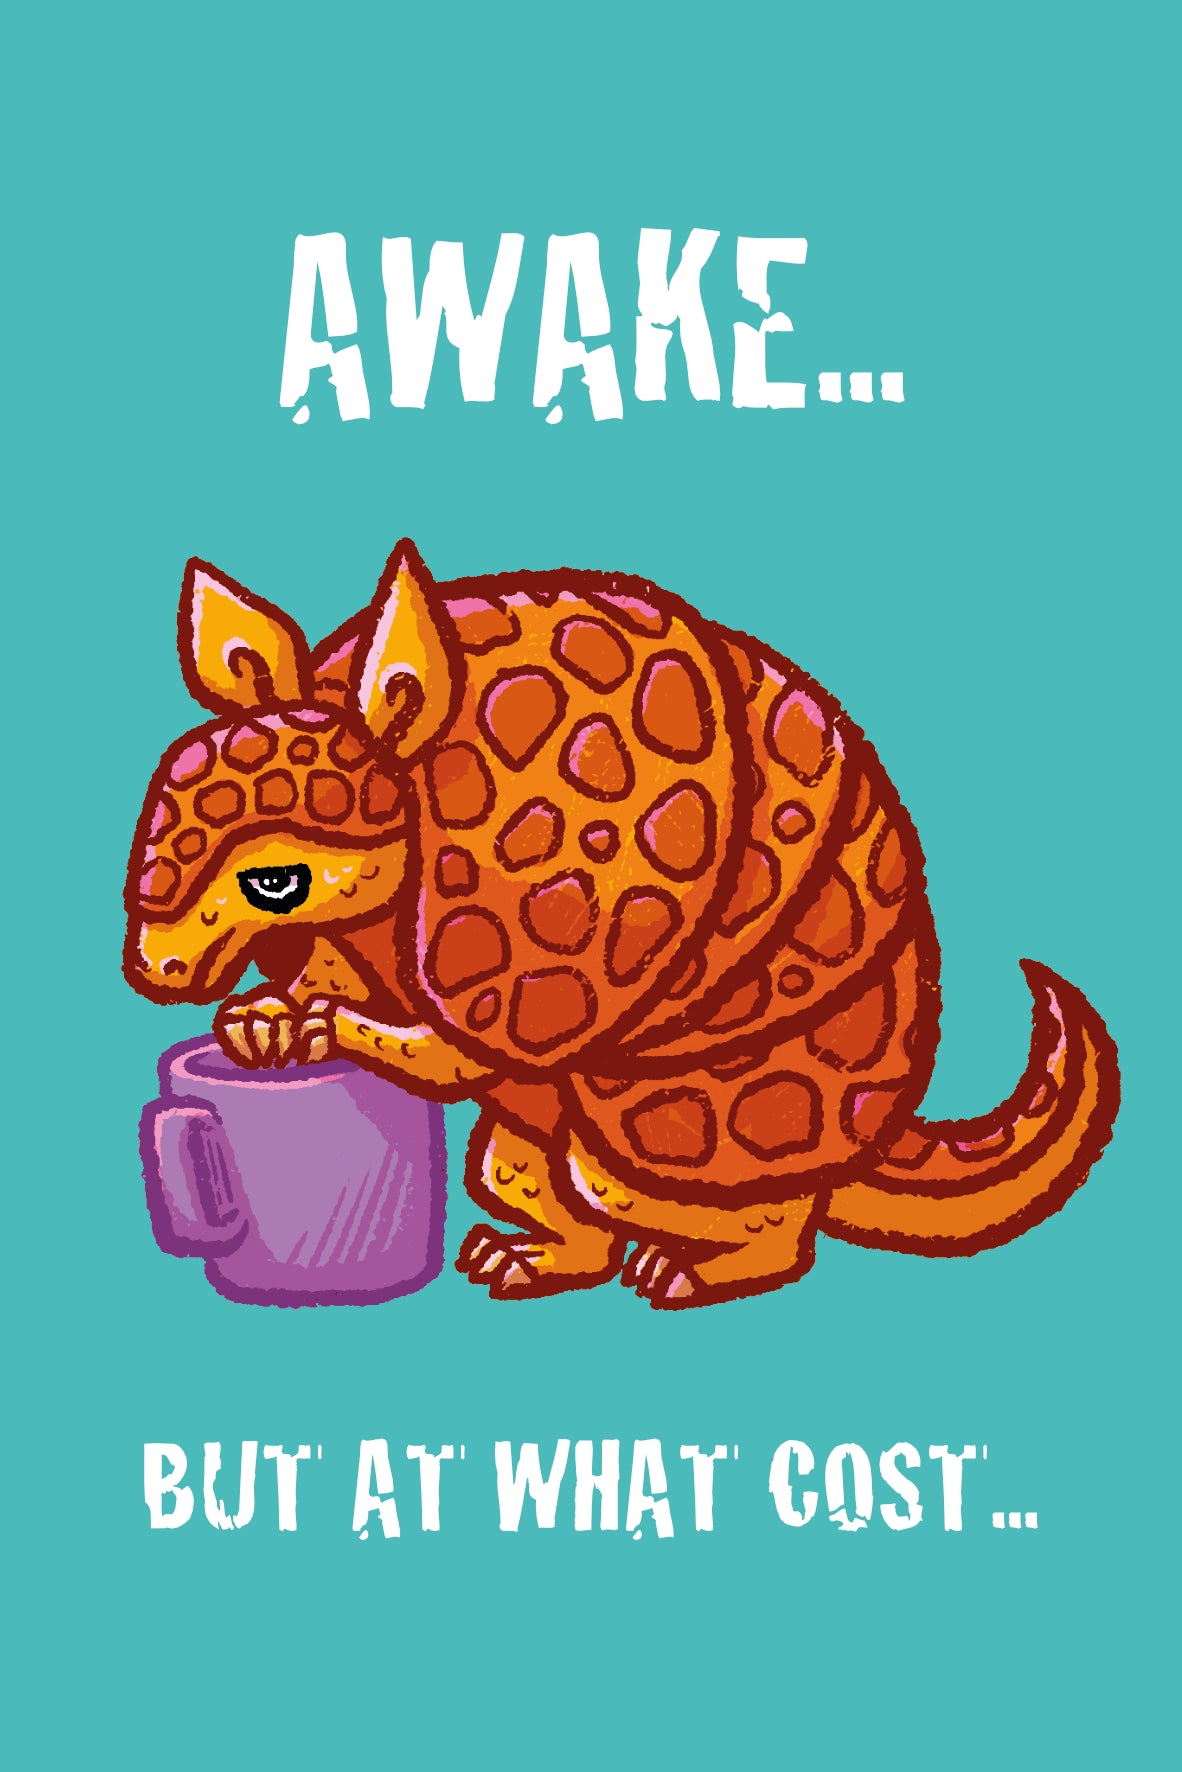 Awake, but at what cost? - Postcard